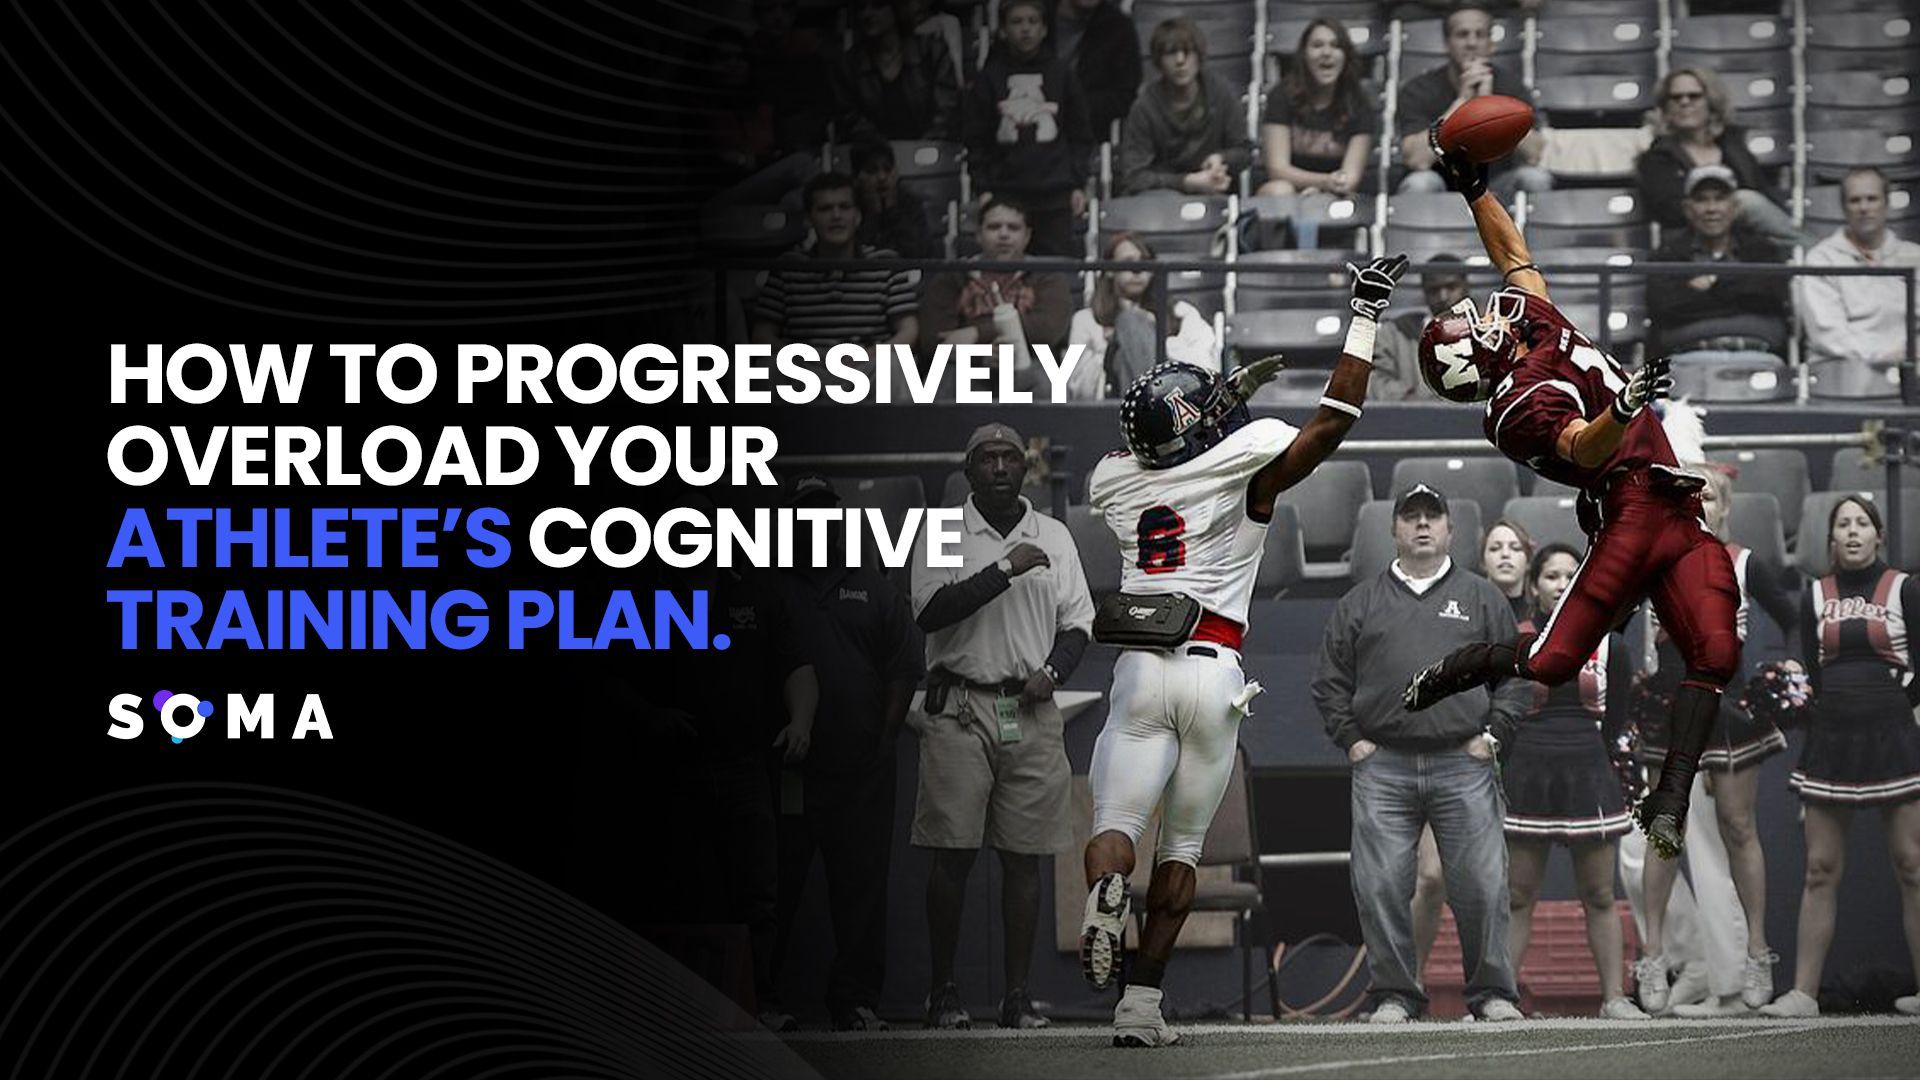 How To Progressively Overload Your Athlete’s Cognitive Training Plan.